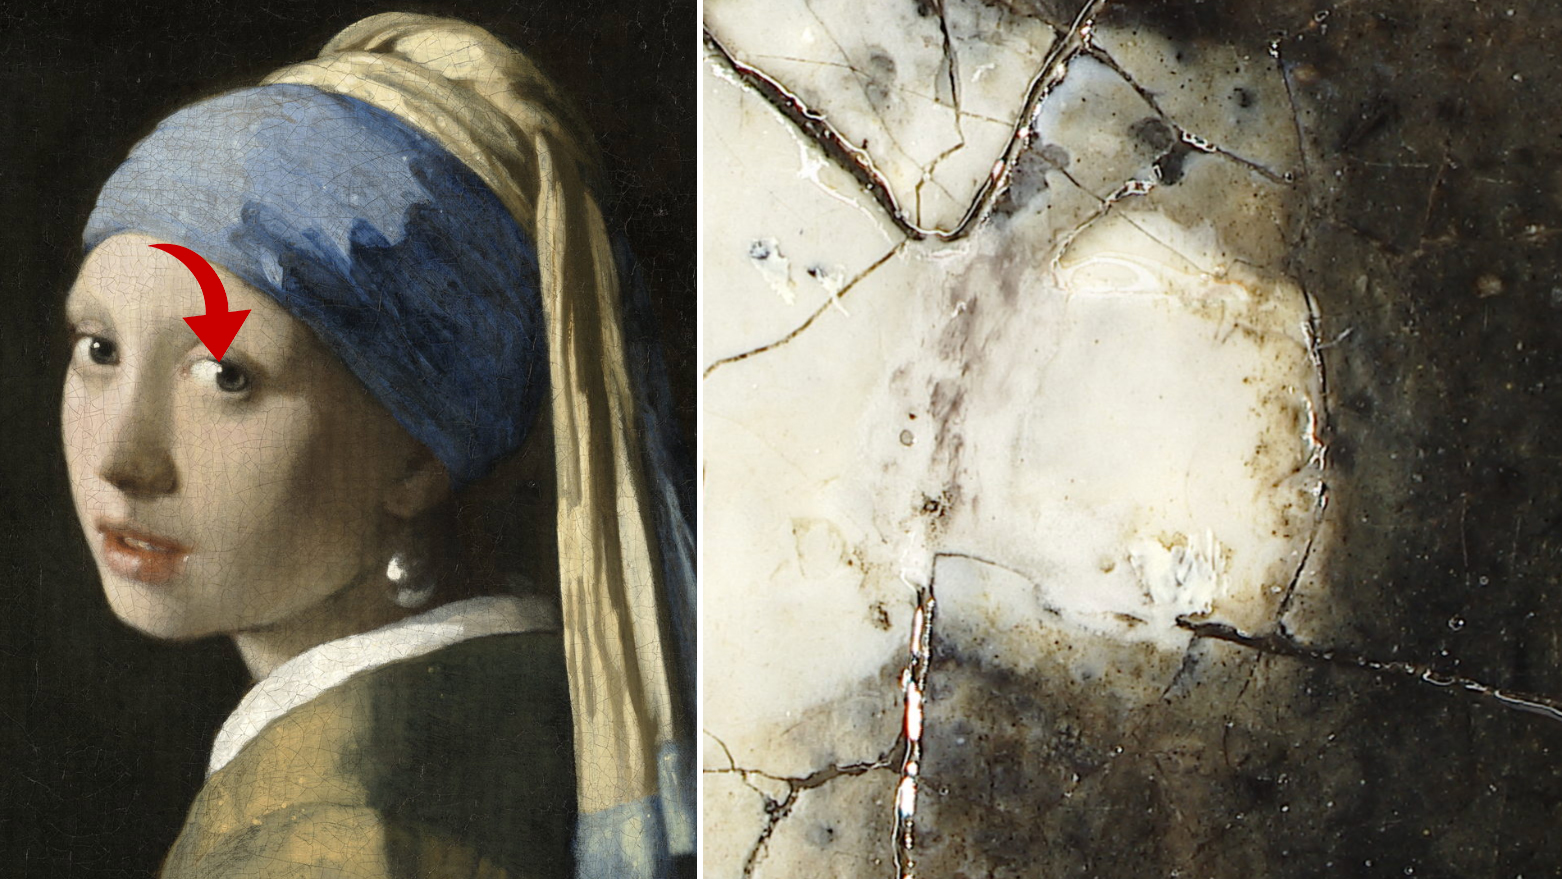 A 10-Billion-Pixel Scan of ‘Girl with a Pearl Earring’ Captures More Detail Than Your Eyes Ever Could